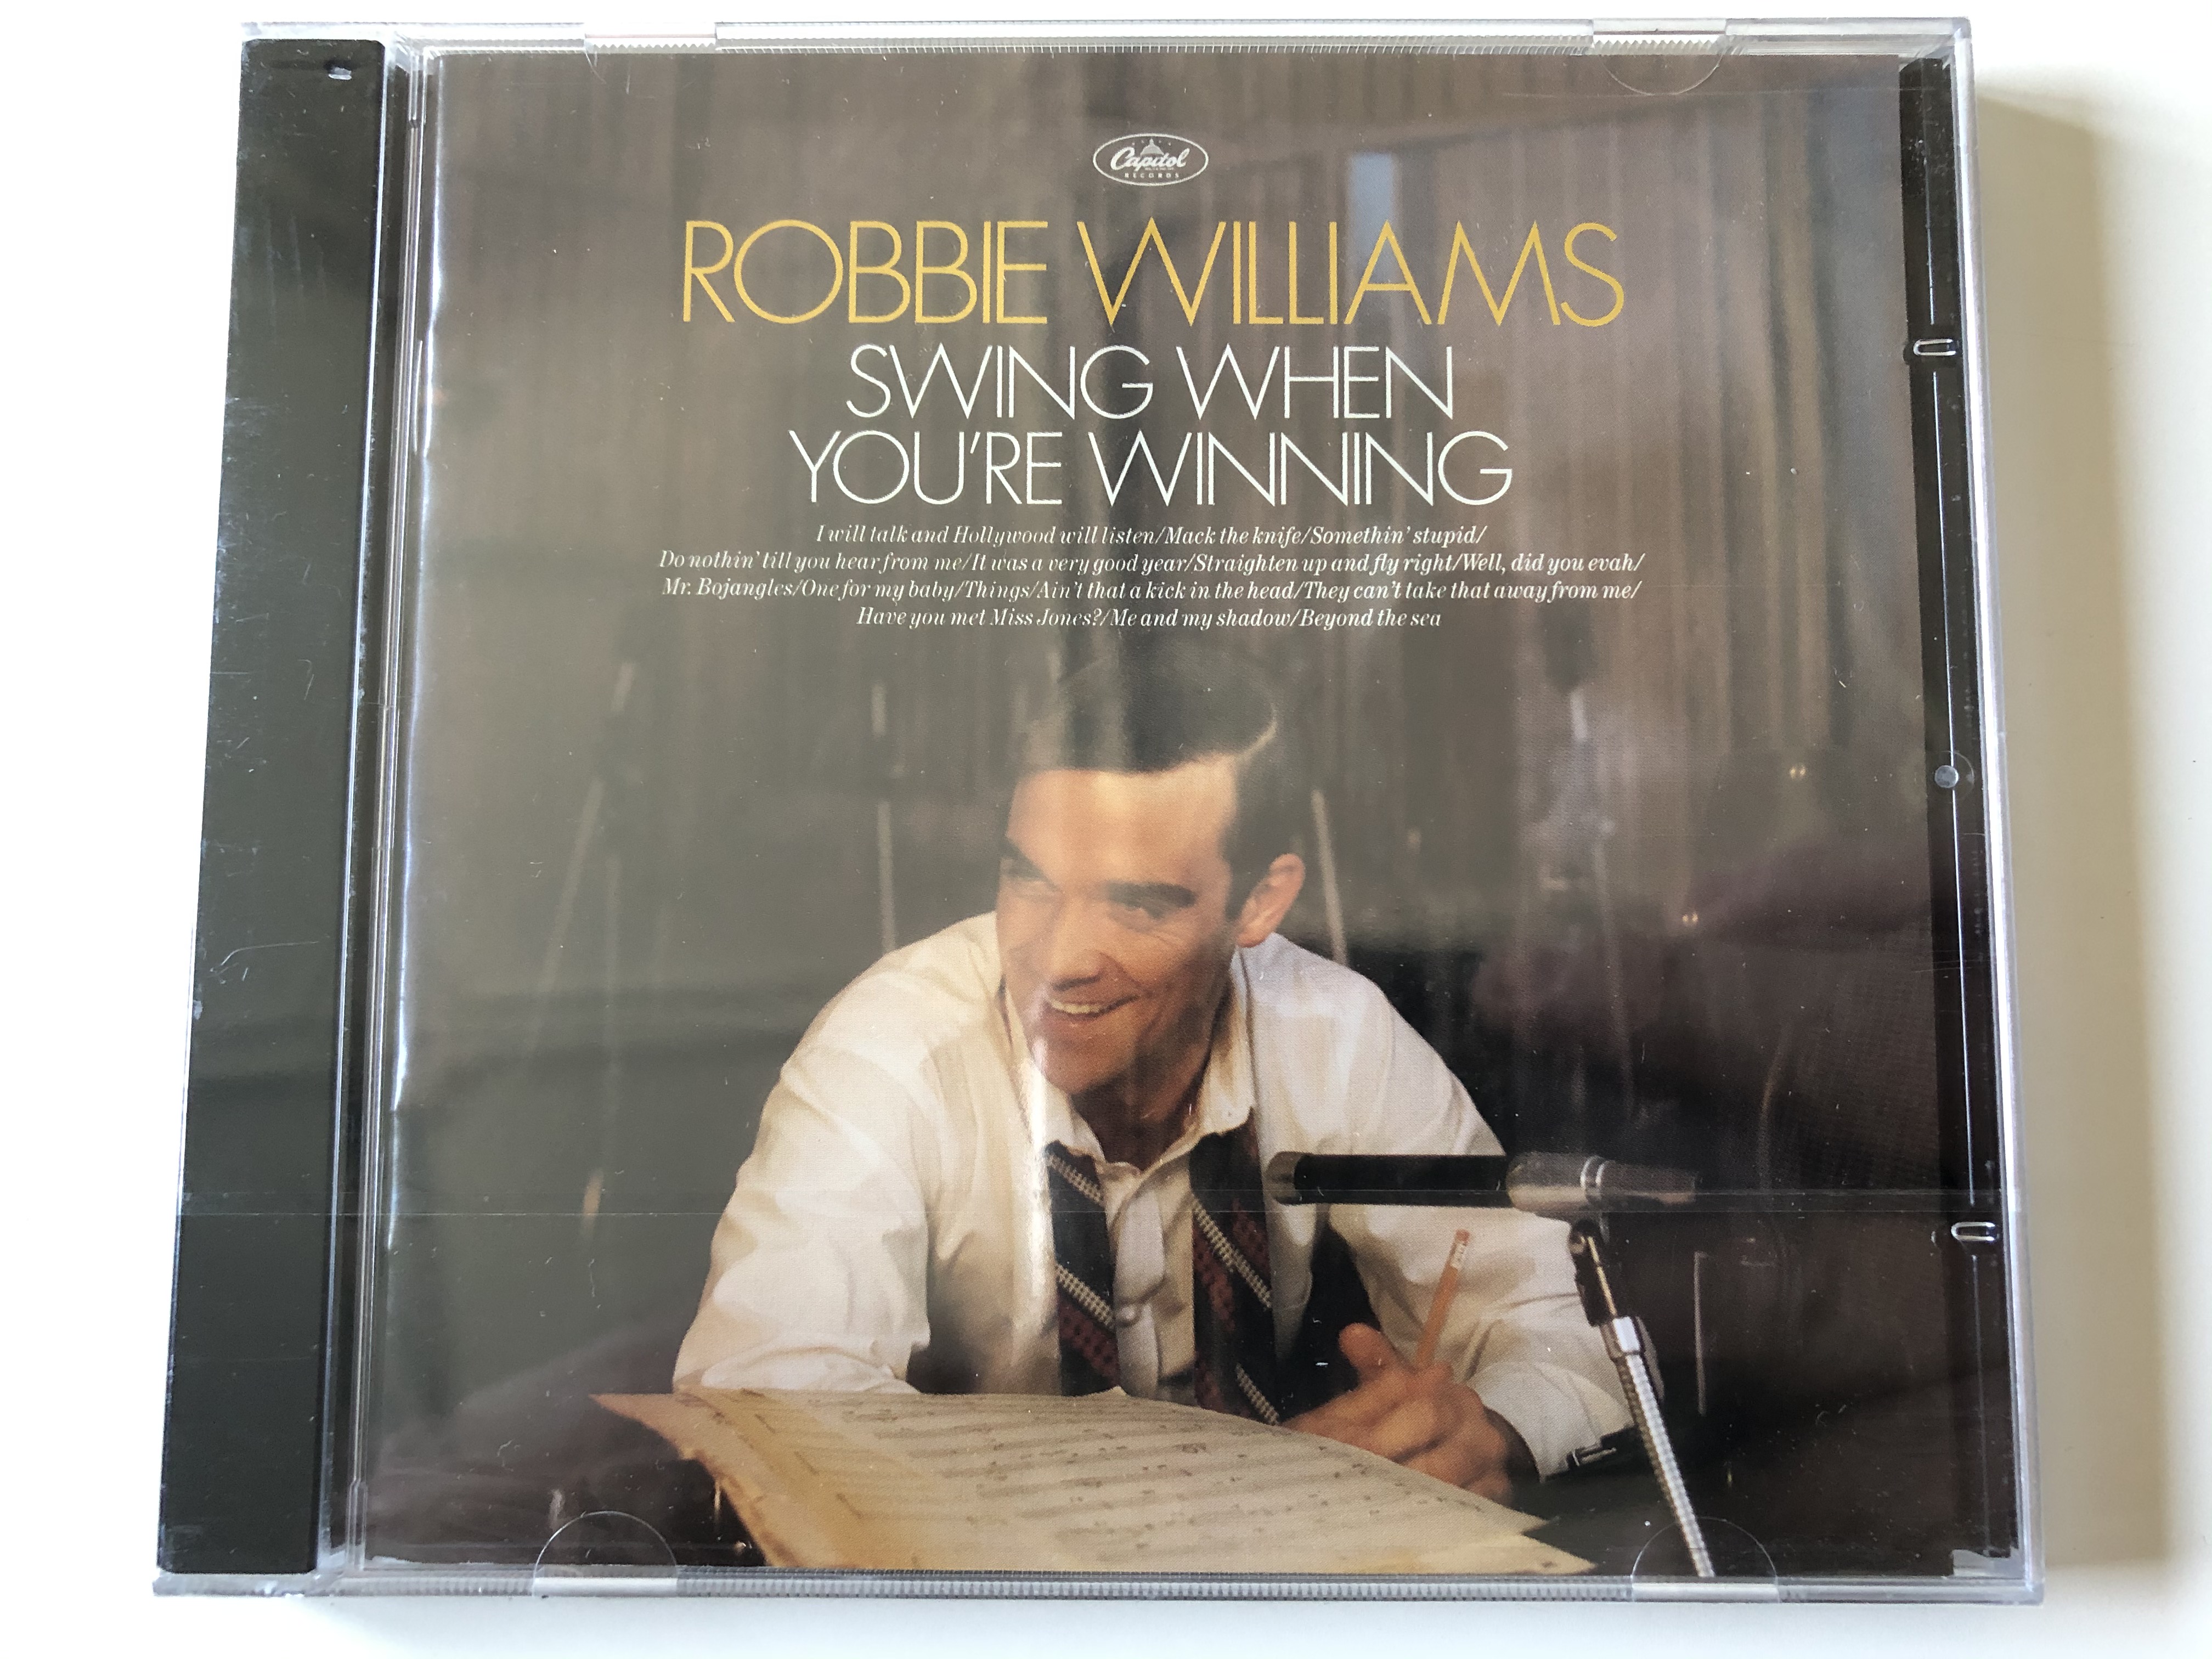 robbie-williams-swing-when-you-re-winning-i-will-talk-and-hollywood-will-listen-mack-the-knife-somethin-stupid-do-nothin-till-you-hear-from-me-it-was-a-very-good-year-straighten-up-an-1-.jpg